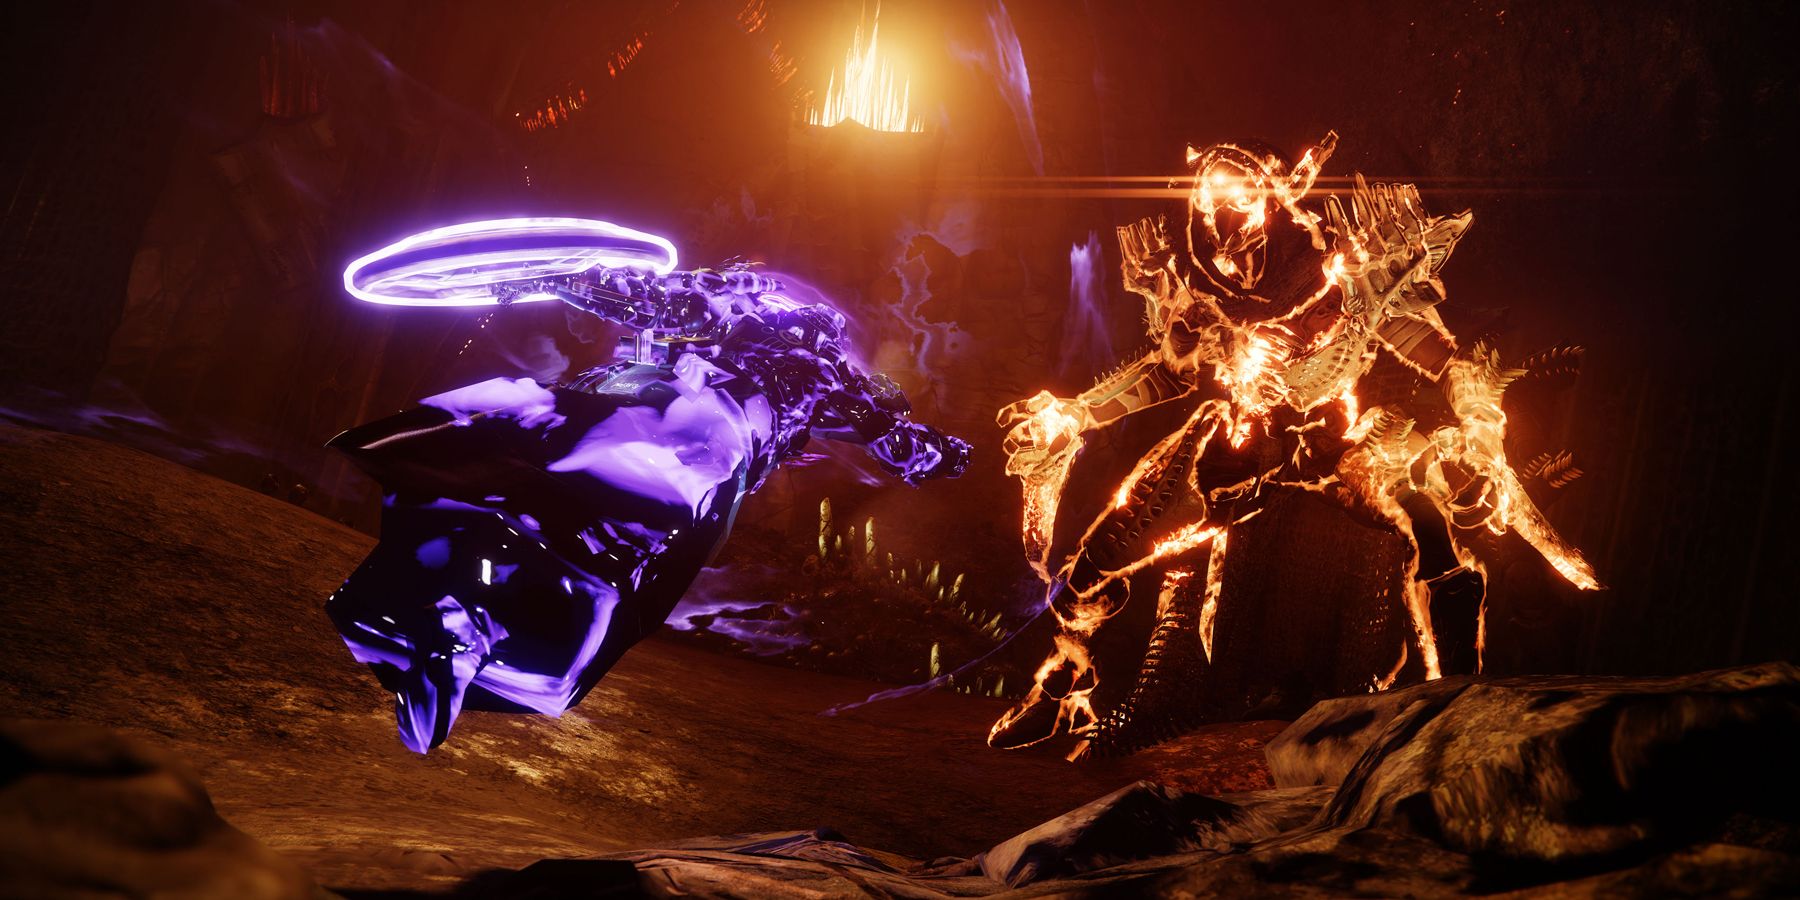 A Void subclass Titan attacks a Solar Acolyte in The Witch Queen expansion of Destiny 2.